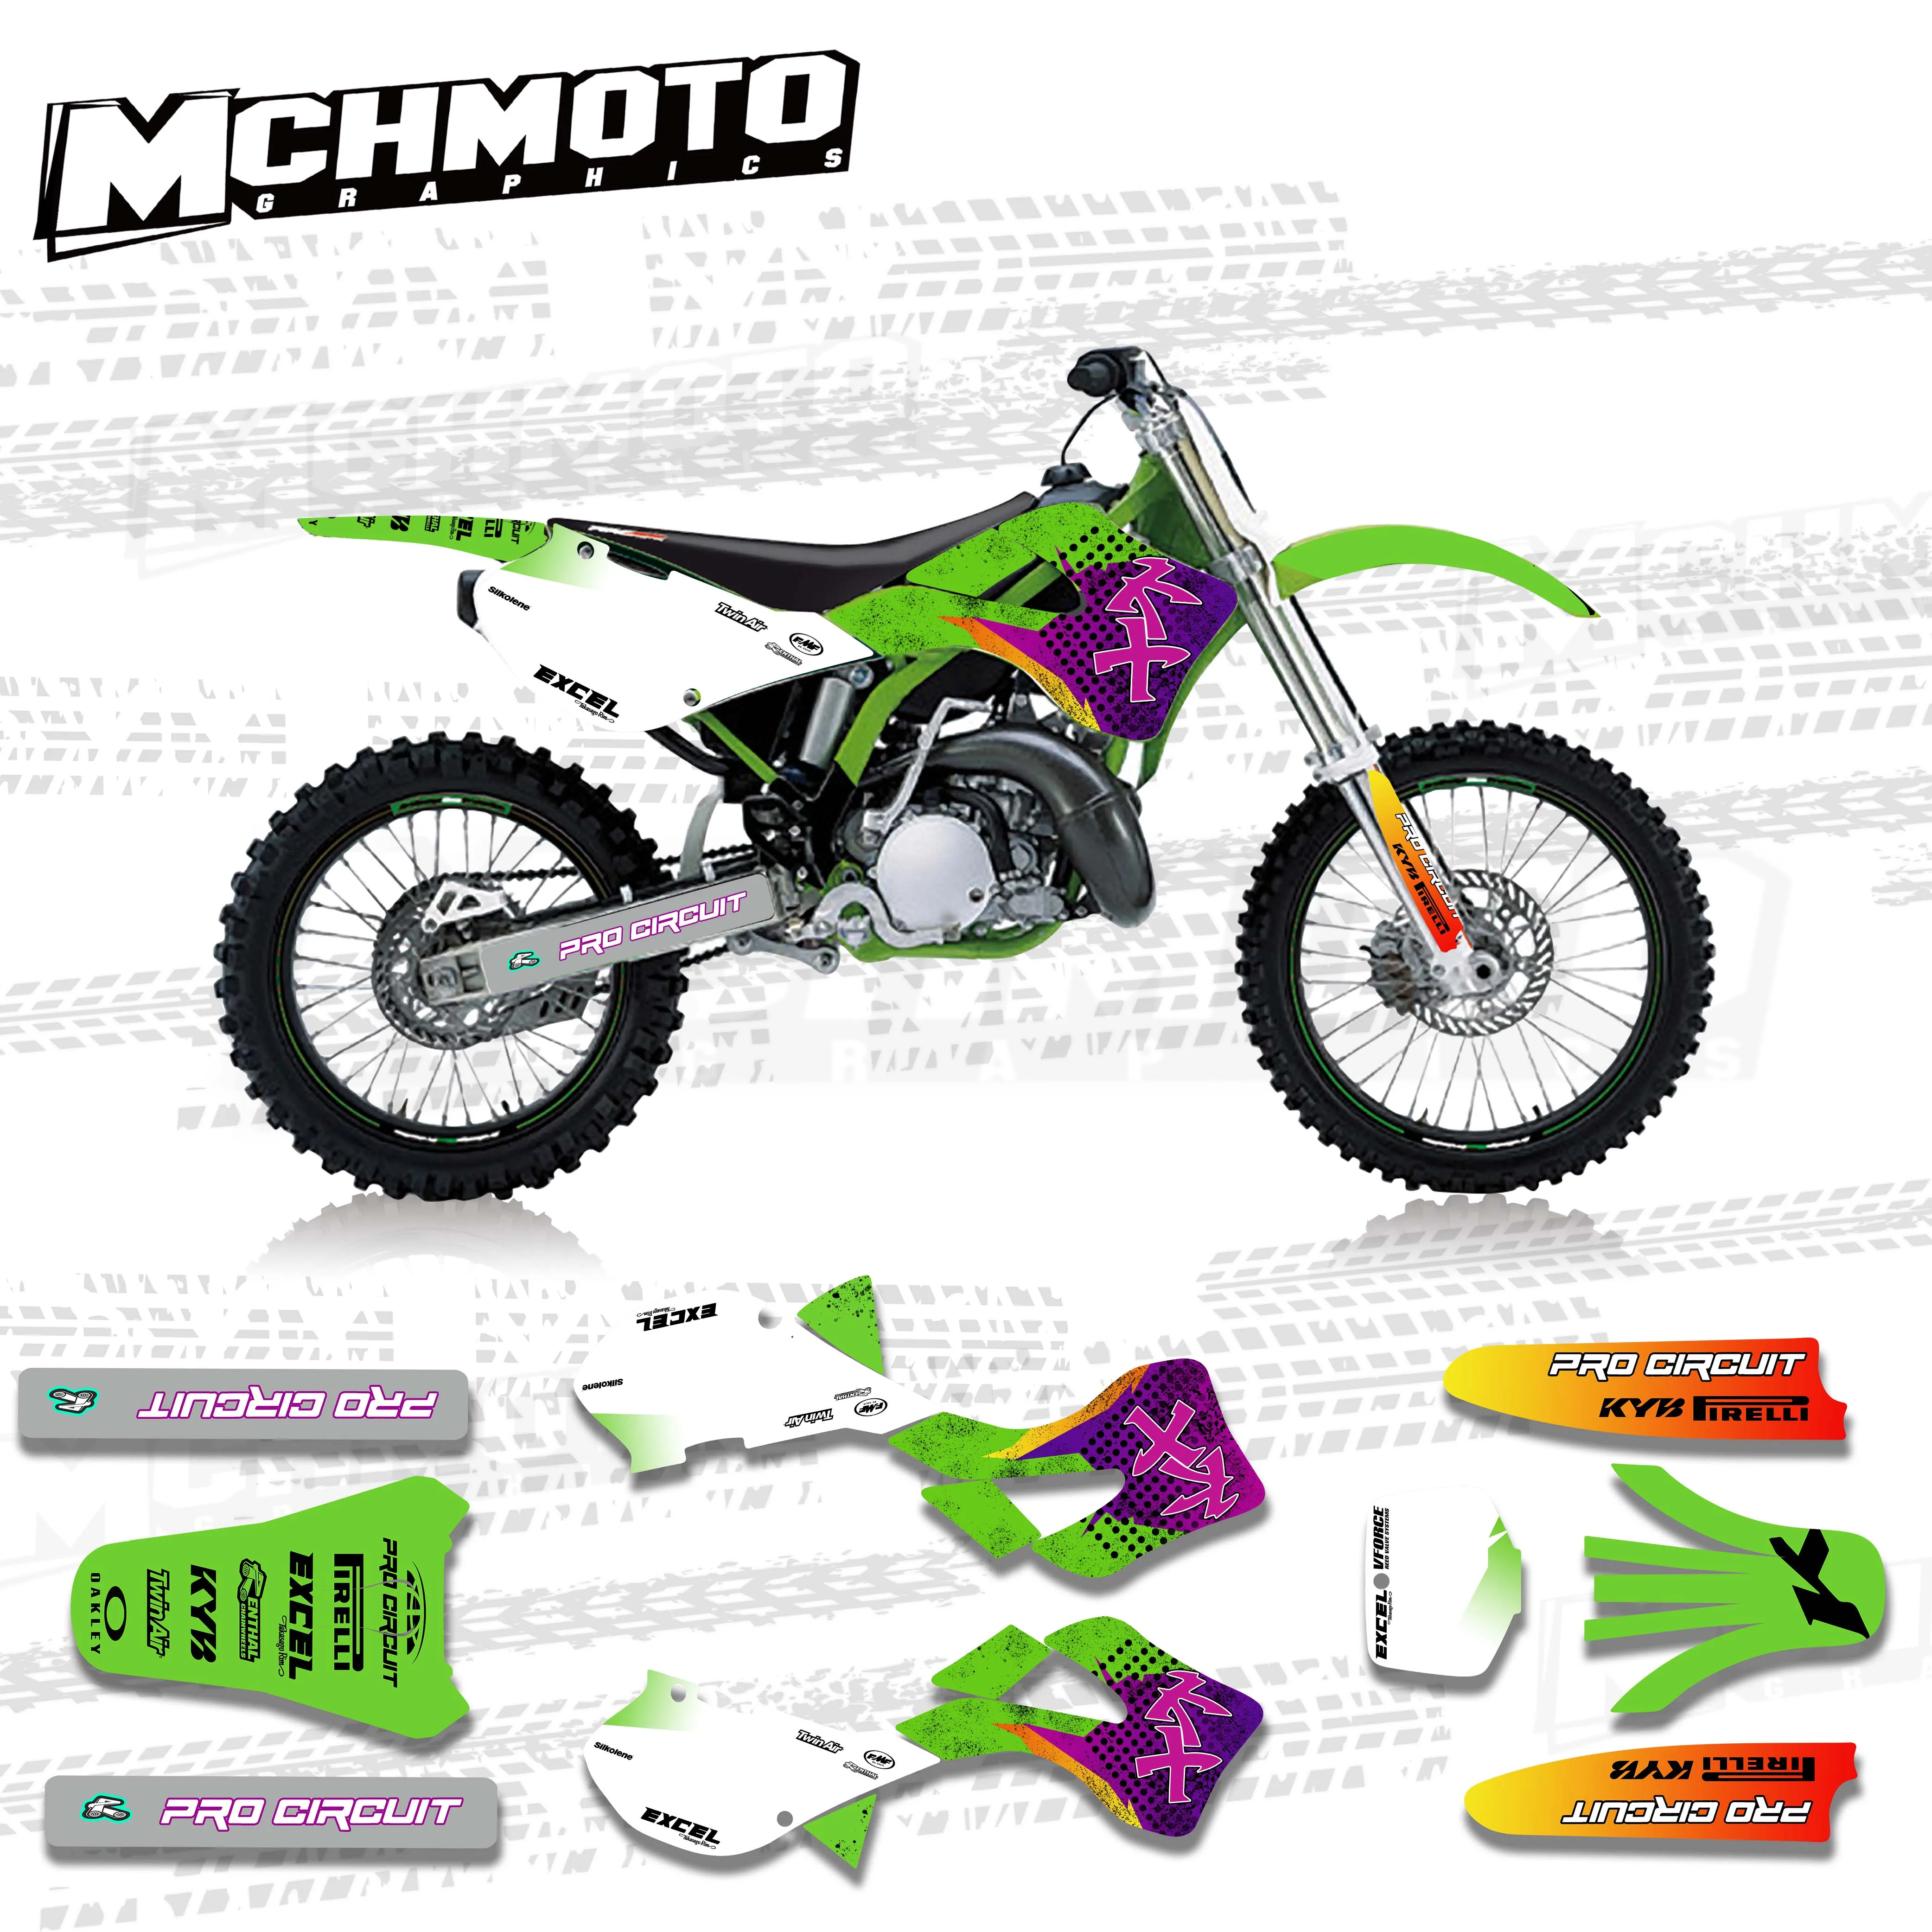 MCHMFG Graphics & Background Decal Sticker Kit for Kawasaki 1999-2002 KX 125 motorcycle stickers 1999 2000 2001 2002